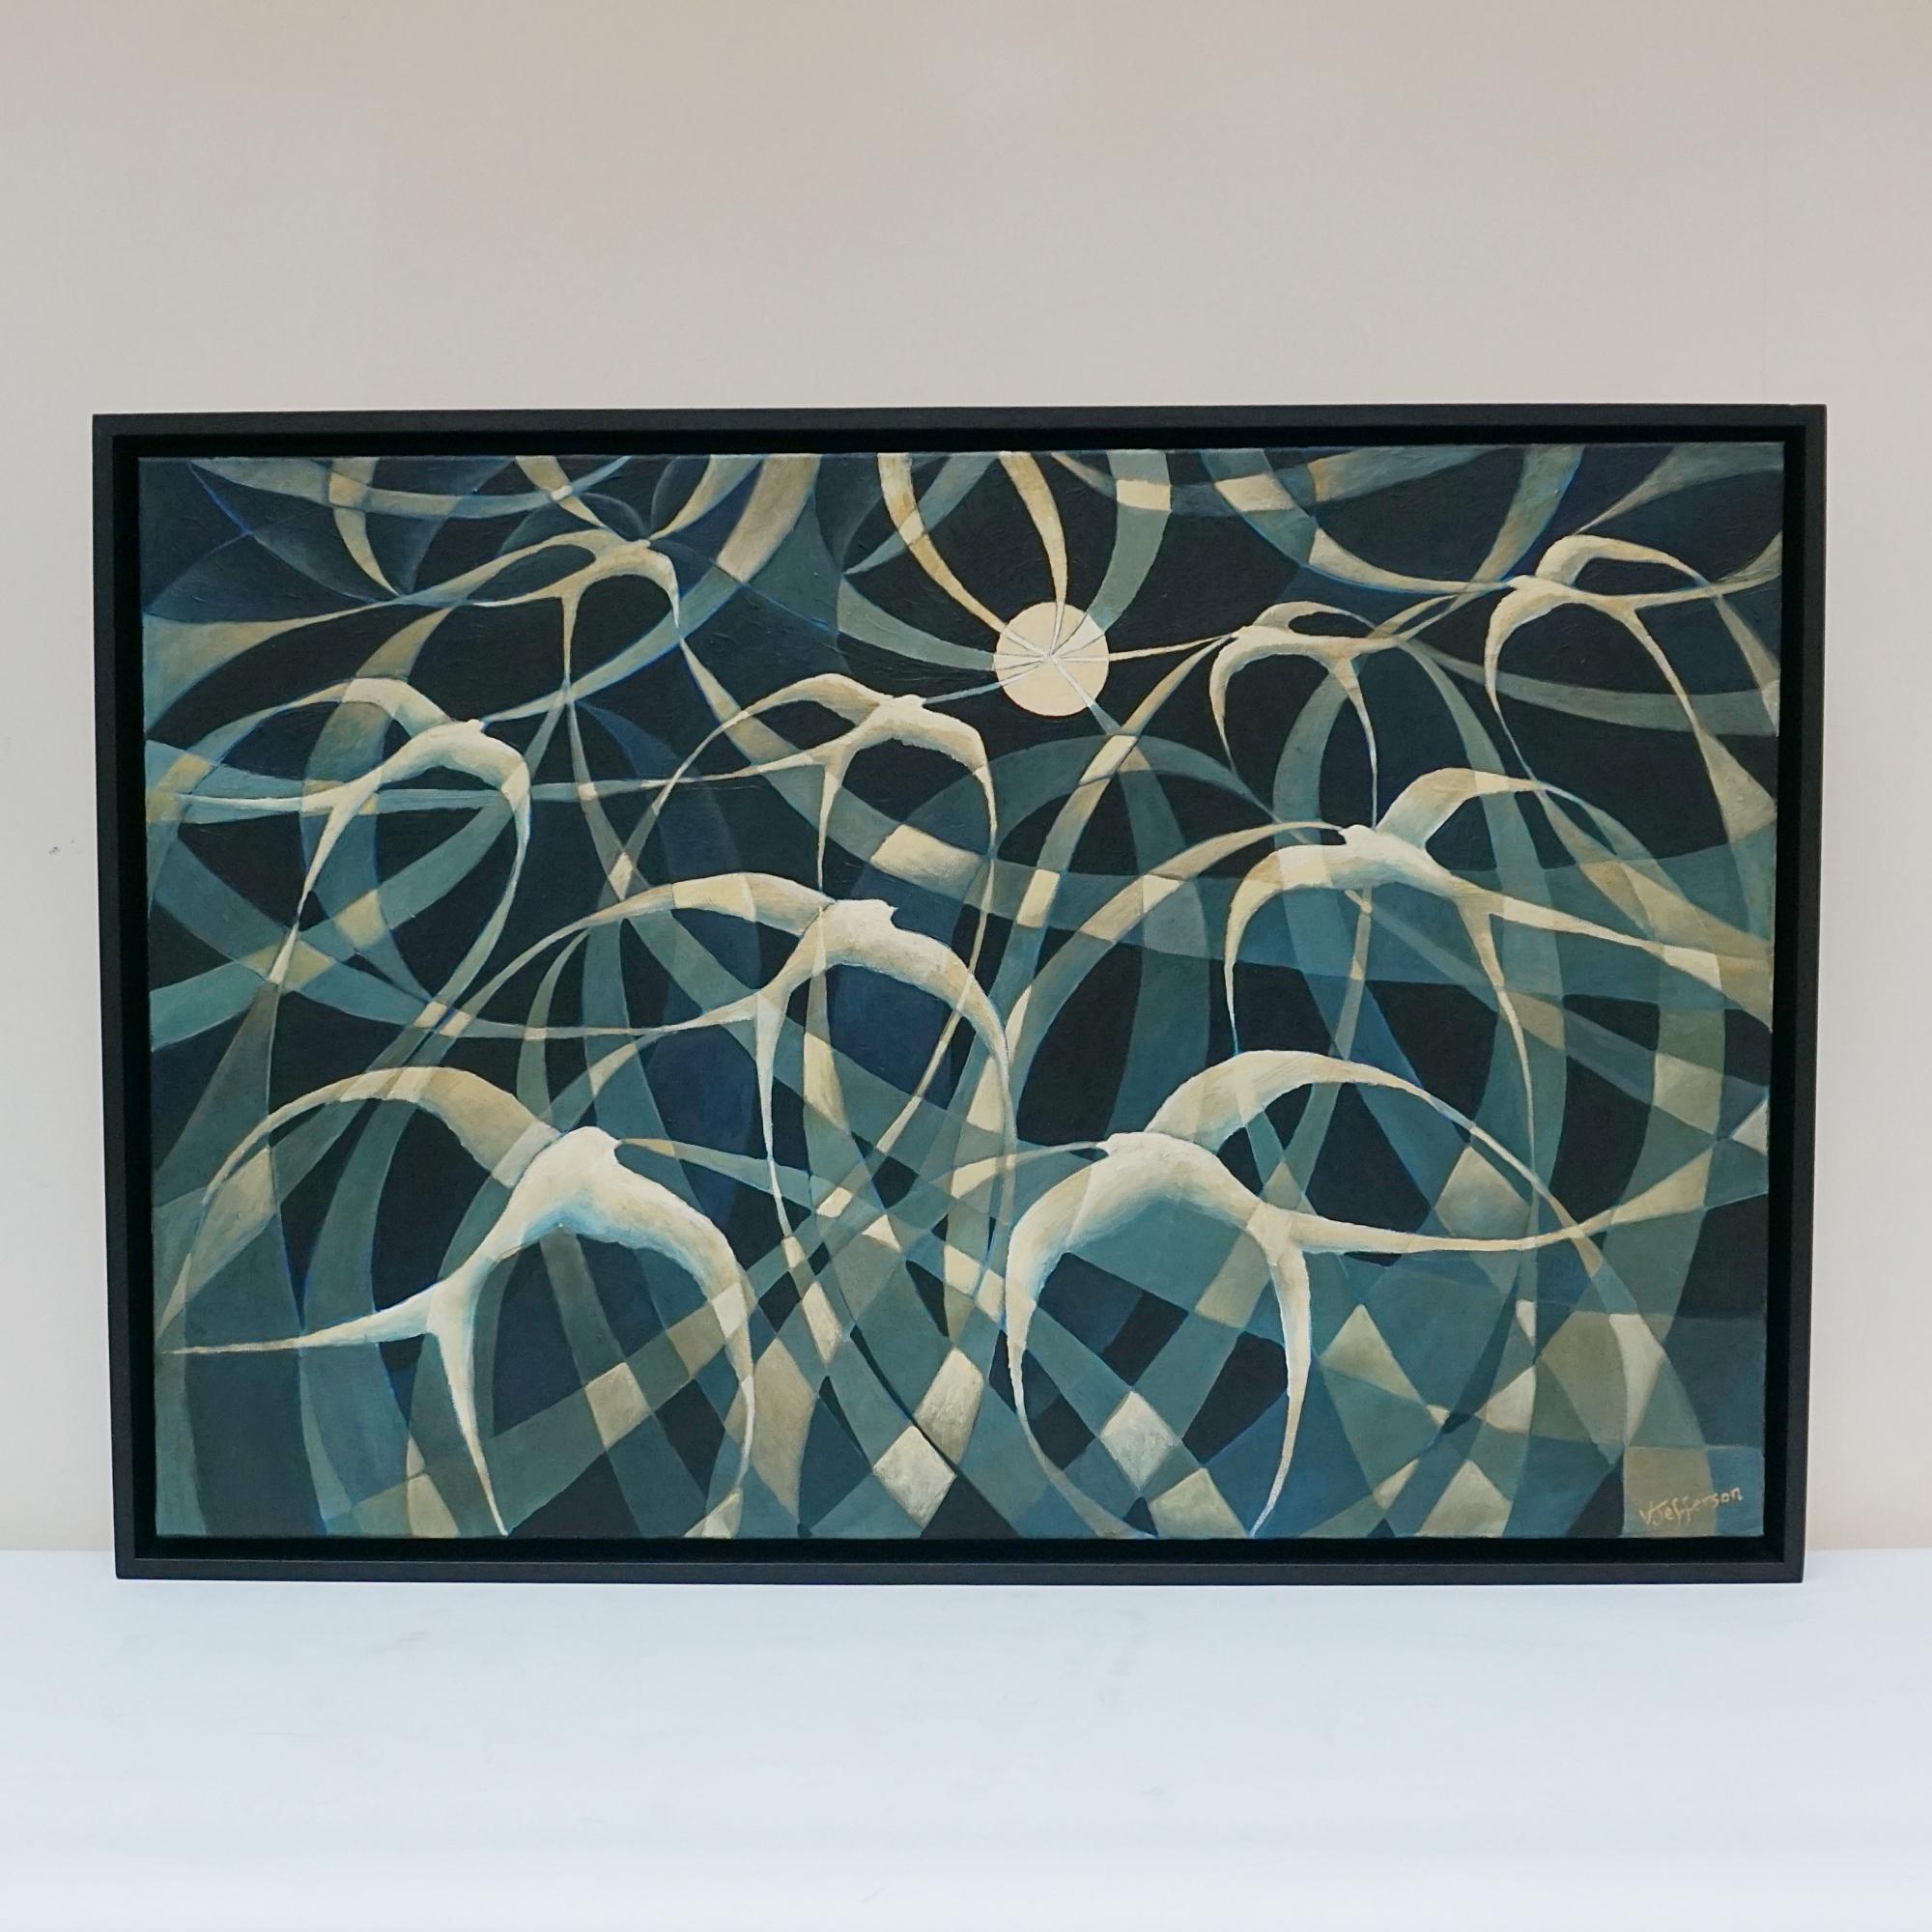 'Mystical Moon Birds' An Art Deco Style Contemporary painting by Vera Jefferson depicting swirling moonlit skylarks against  a blue, stylised, abstract background .  Signed V Jefferson to lower right. 

Dimensions: H 93cm W 63.5 D 5cm

 Vera